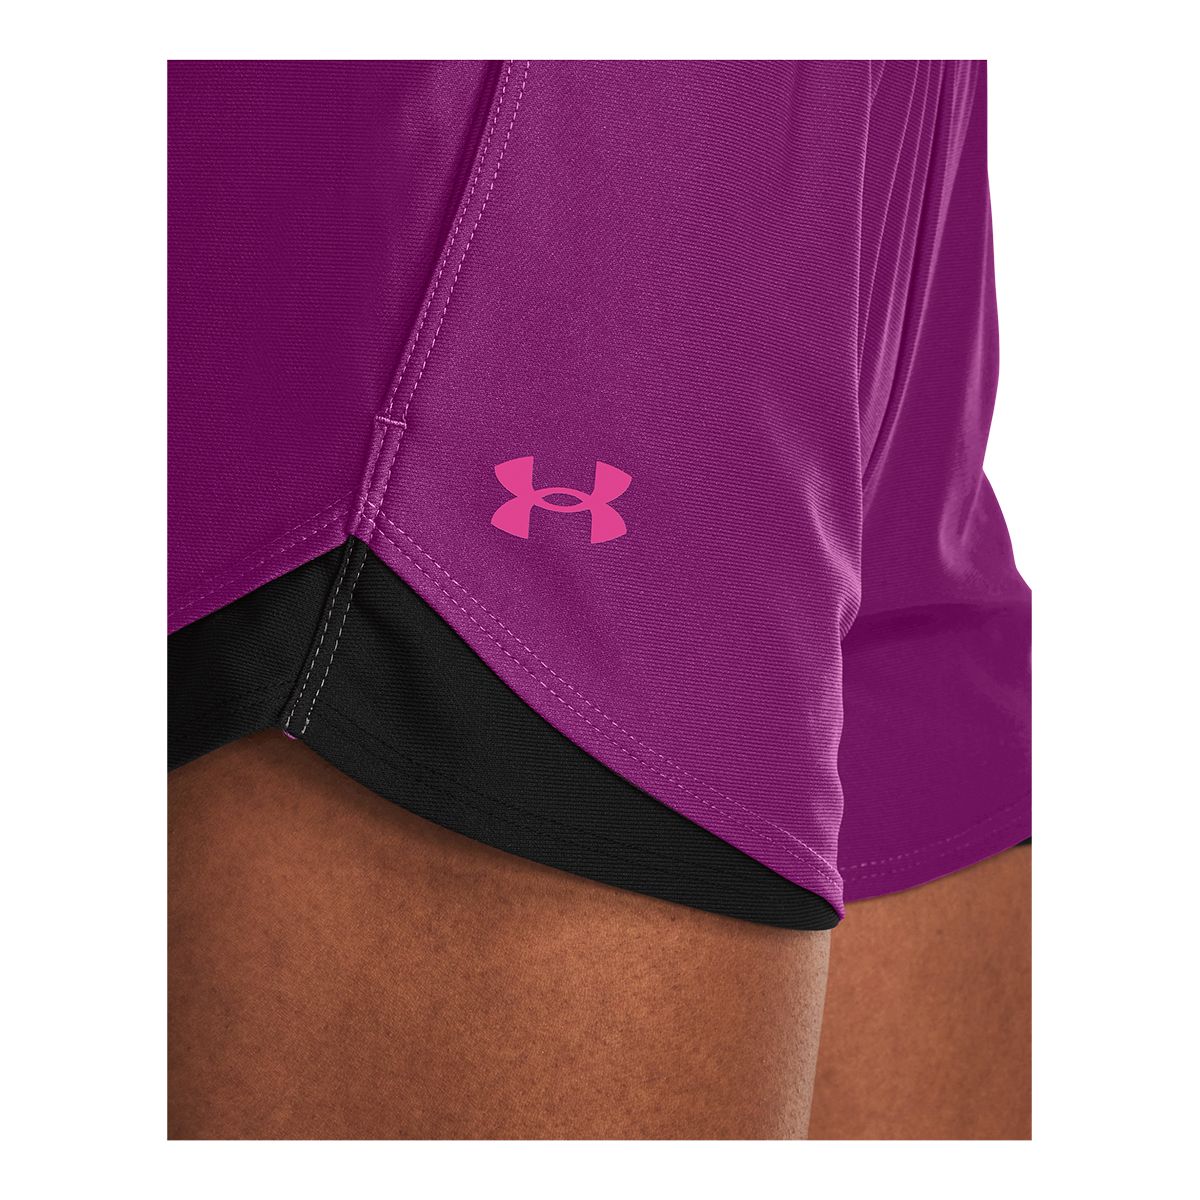 Under Armour Womens XL Black Play Up 2.0 Shorts